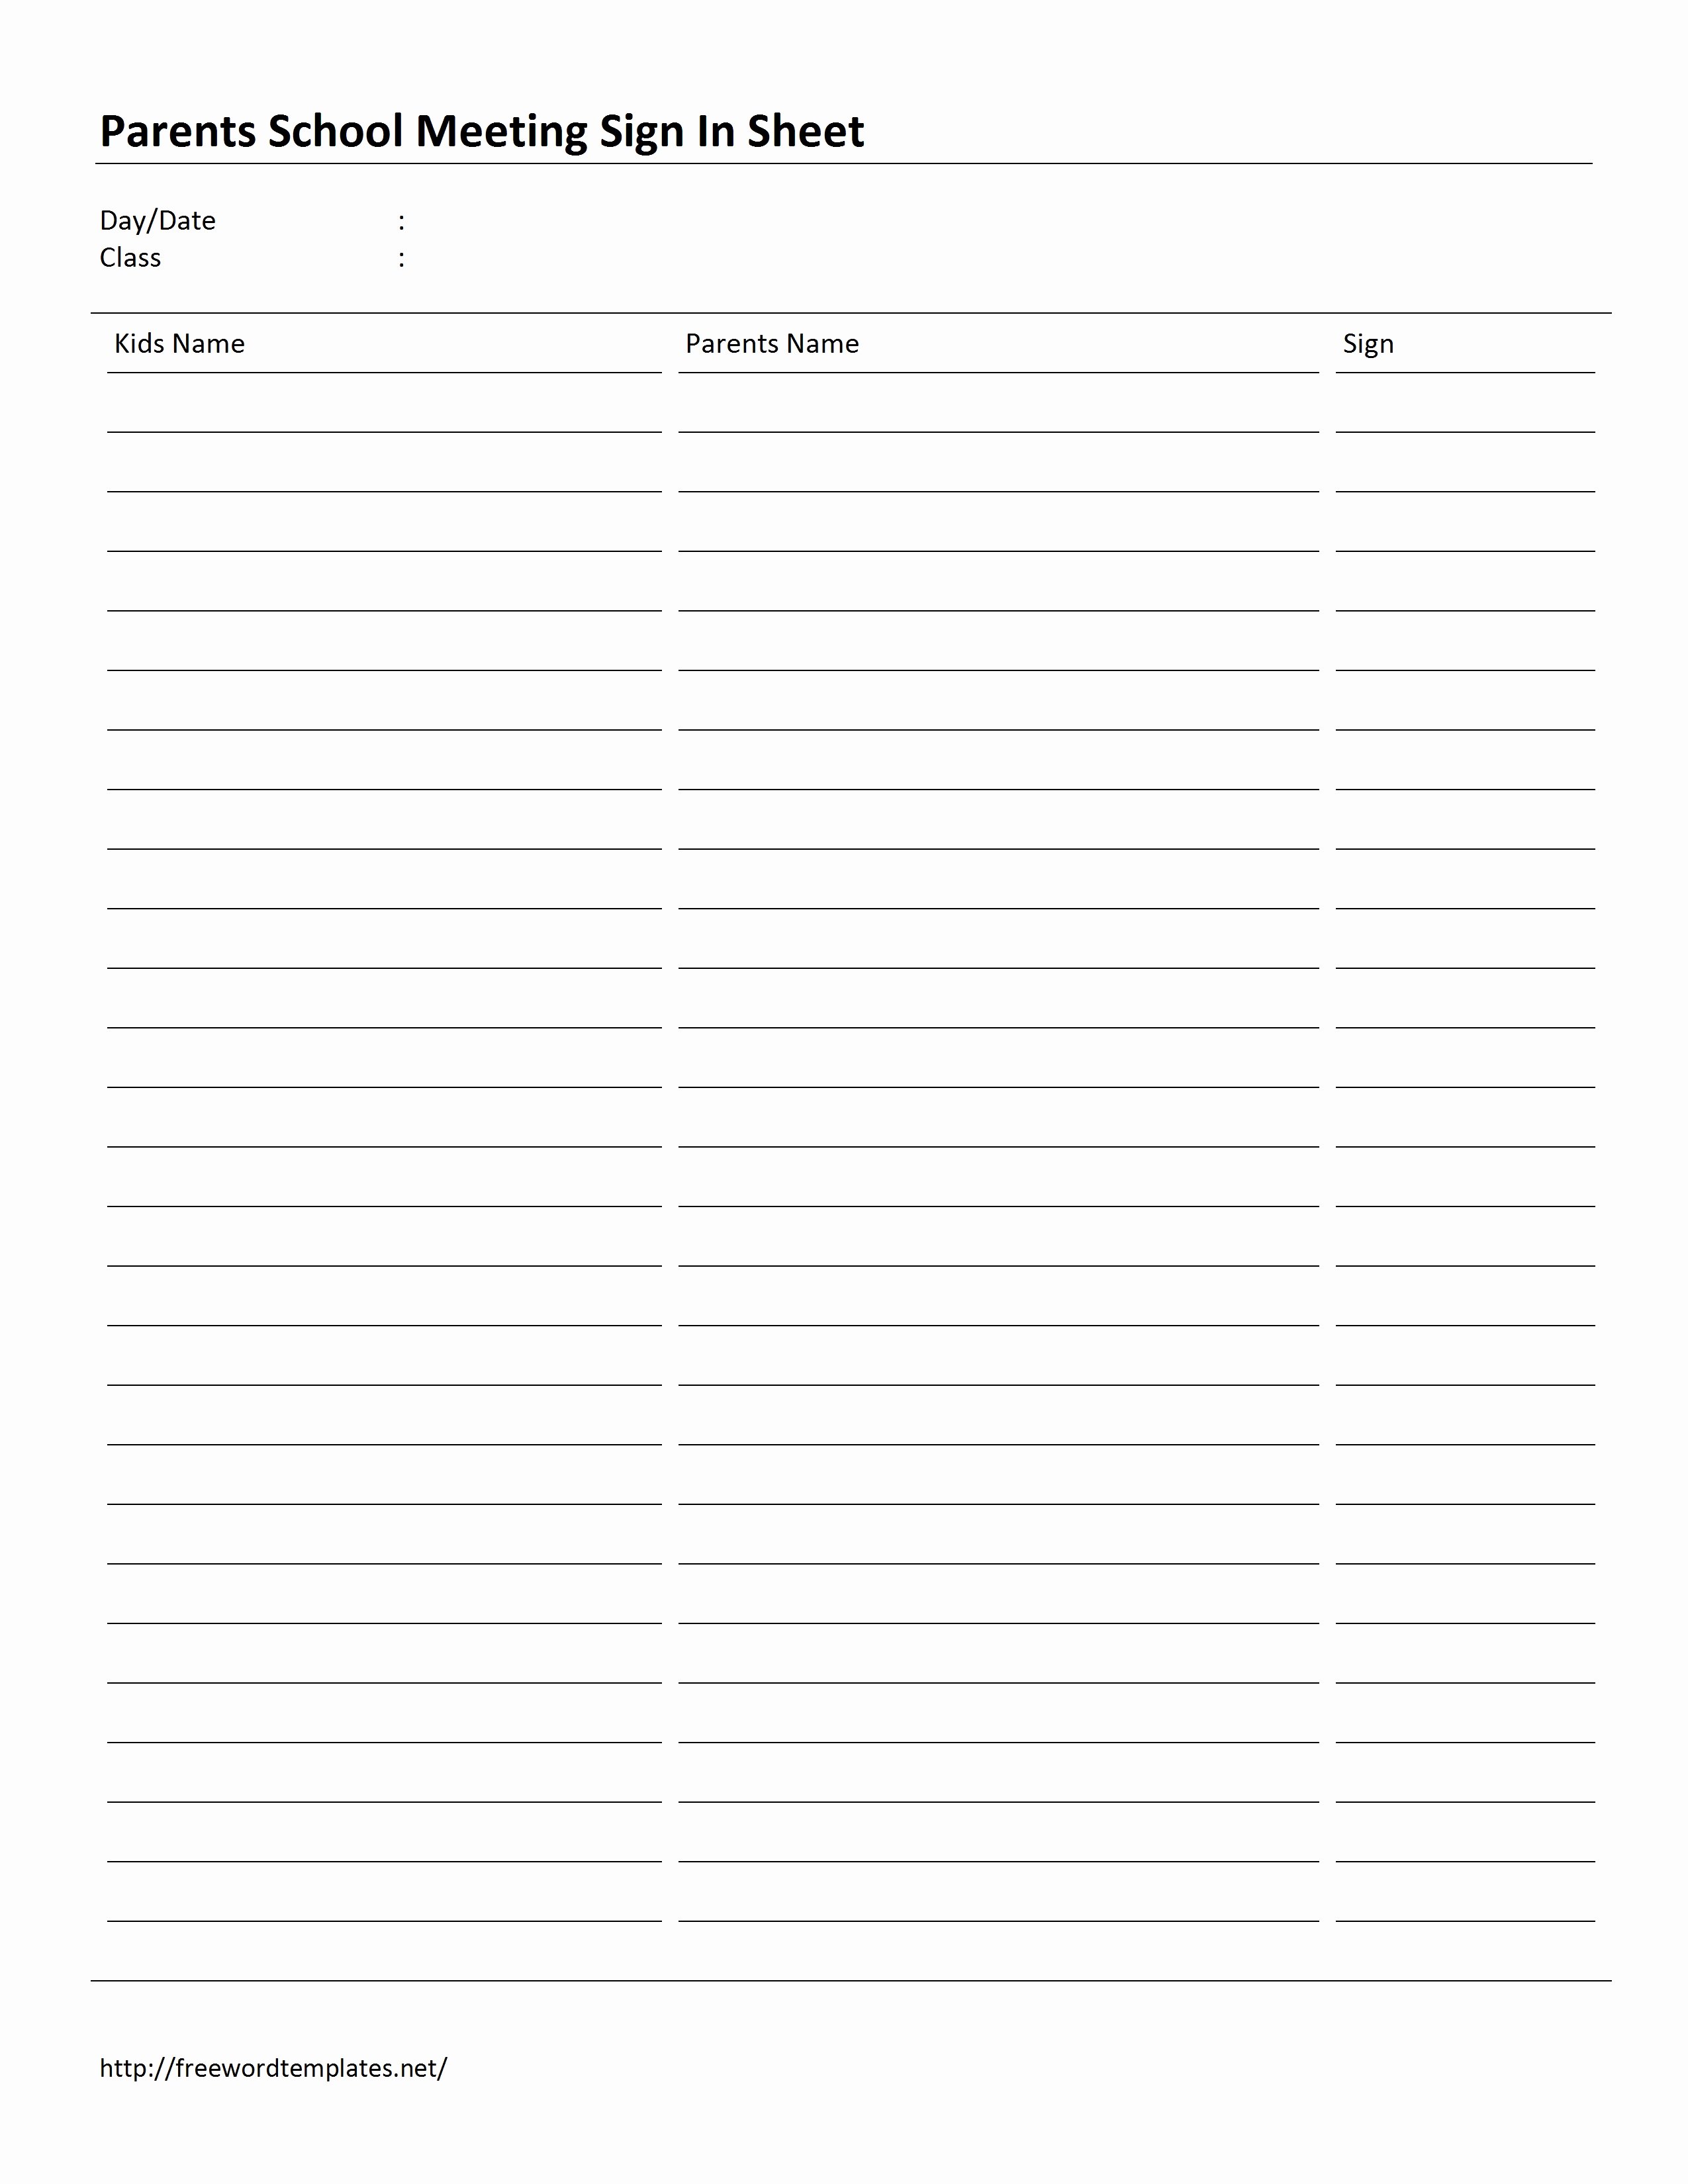 Meeting Sign In Sheet Template Fresh Parents School Meeting Sign In Sheet Template